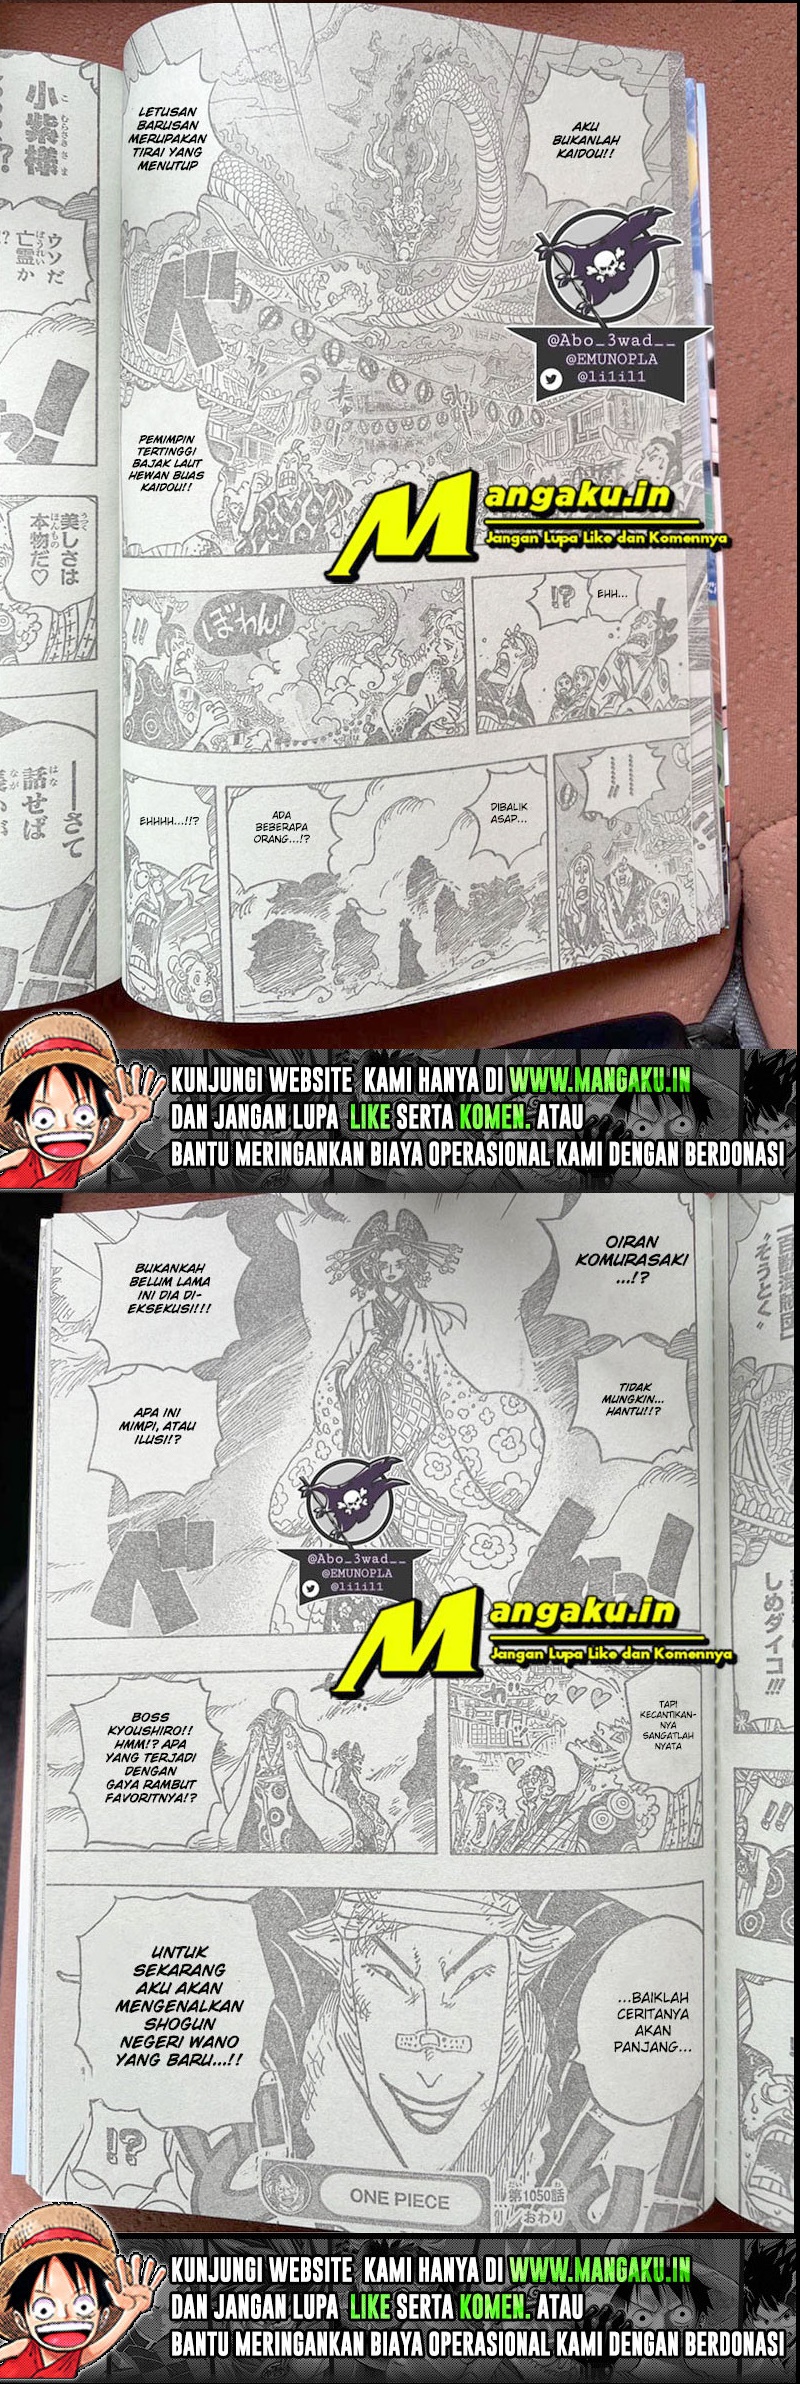 One Piece Chapter 1050